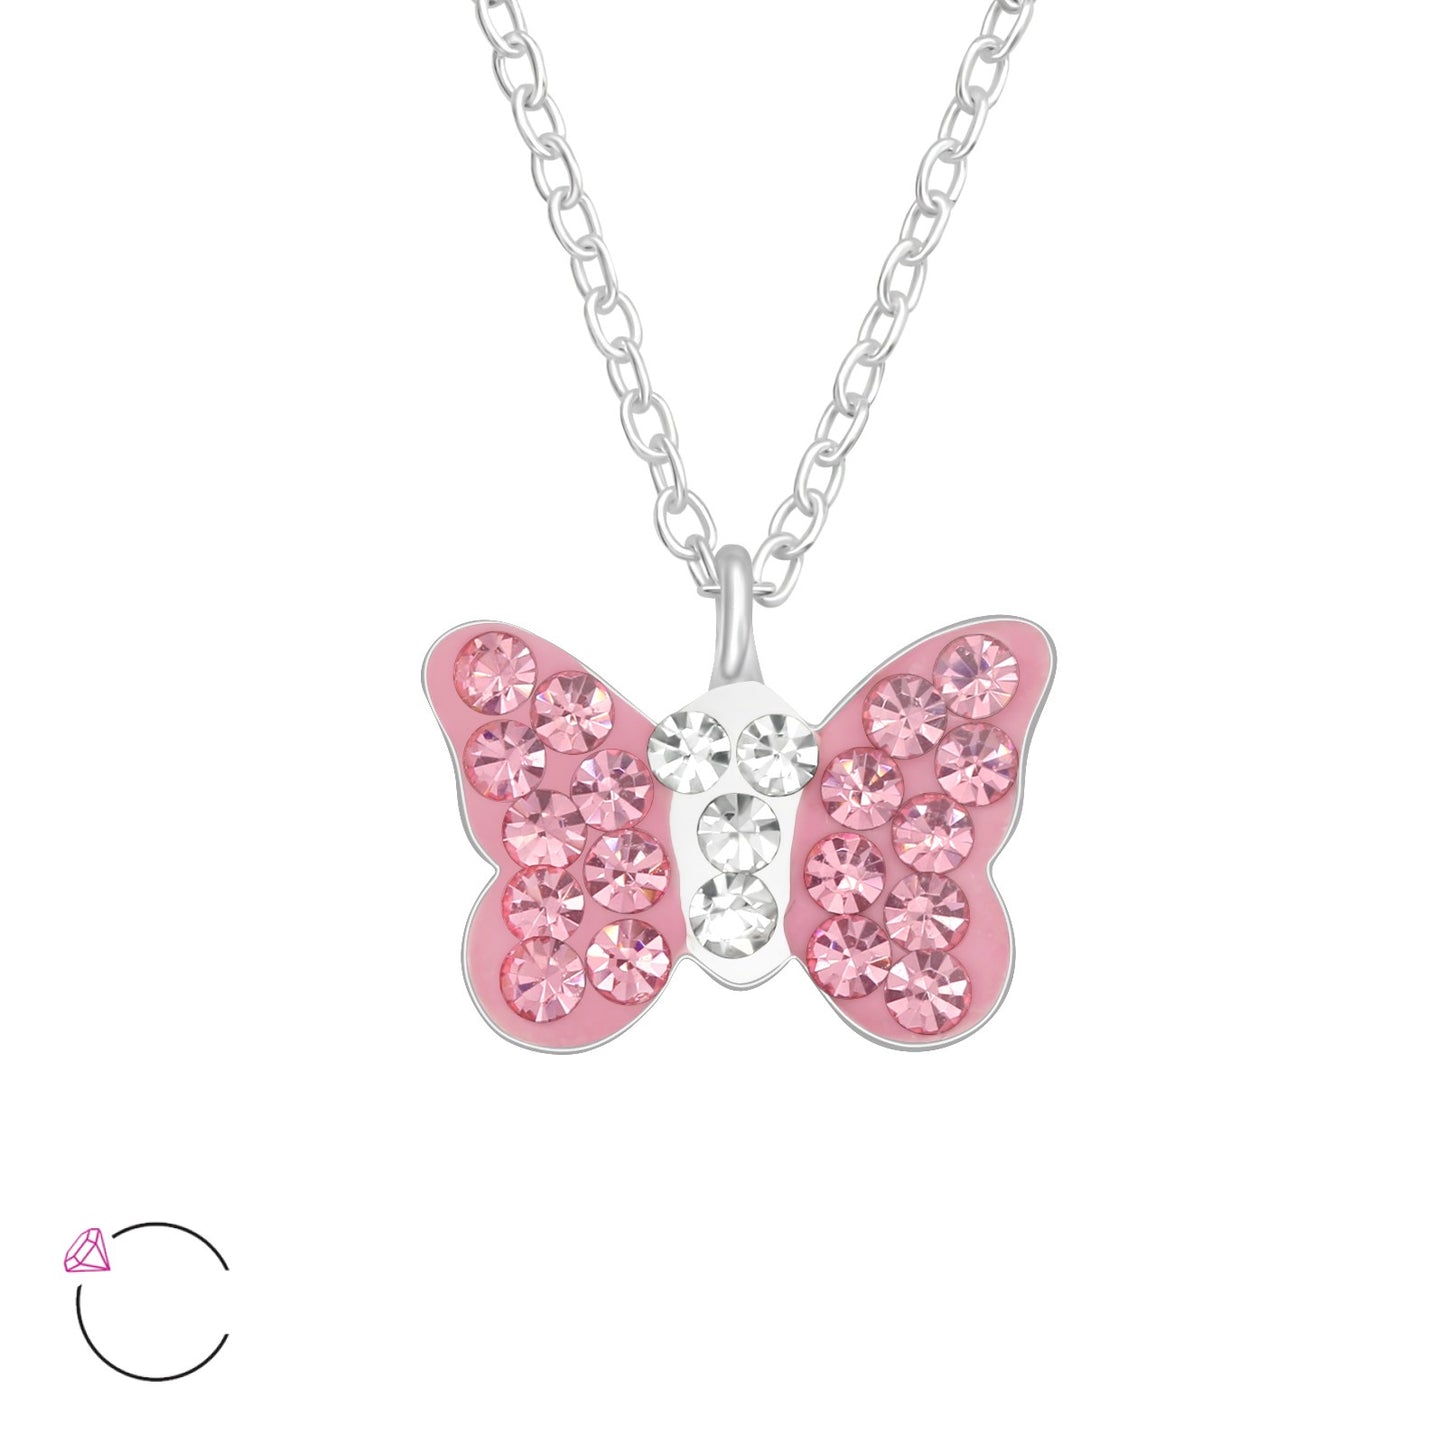 KIDS PINK BUTTERFLY NECKLACE- Shiny Diamanté Crystals on Sterling Silver